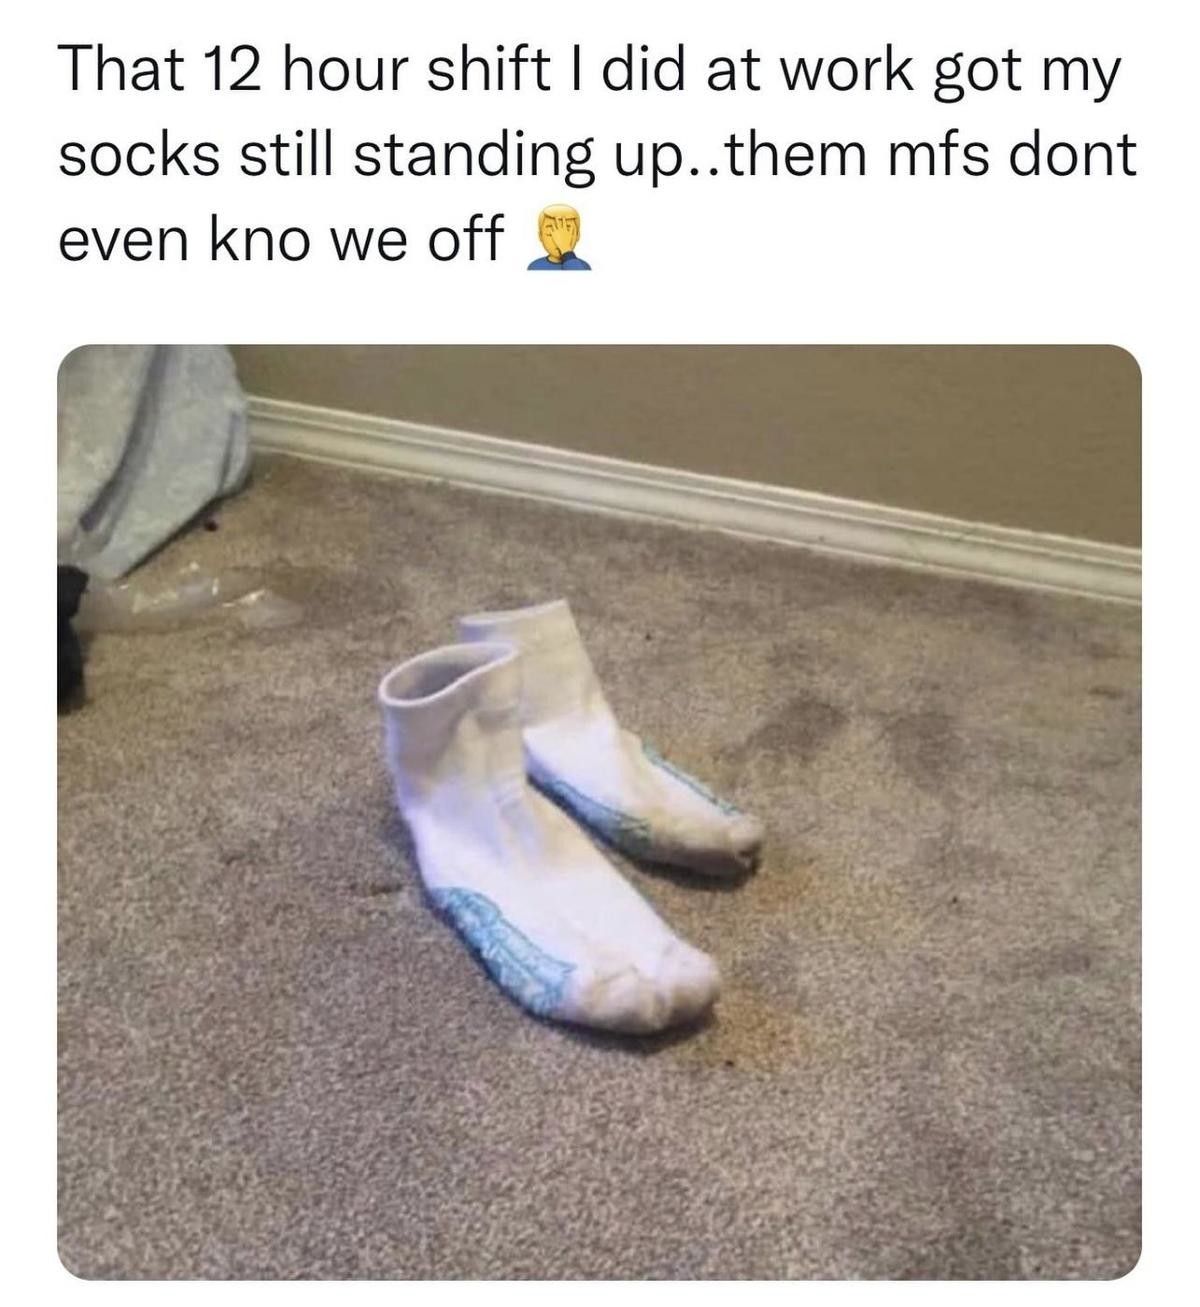 The least bad reason socks be doing this